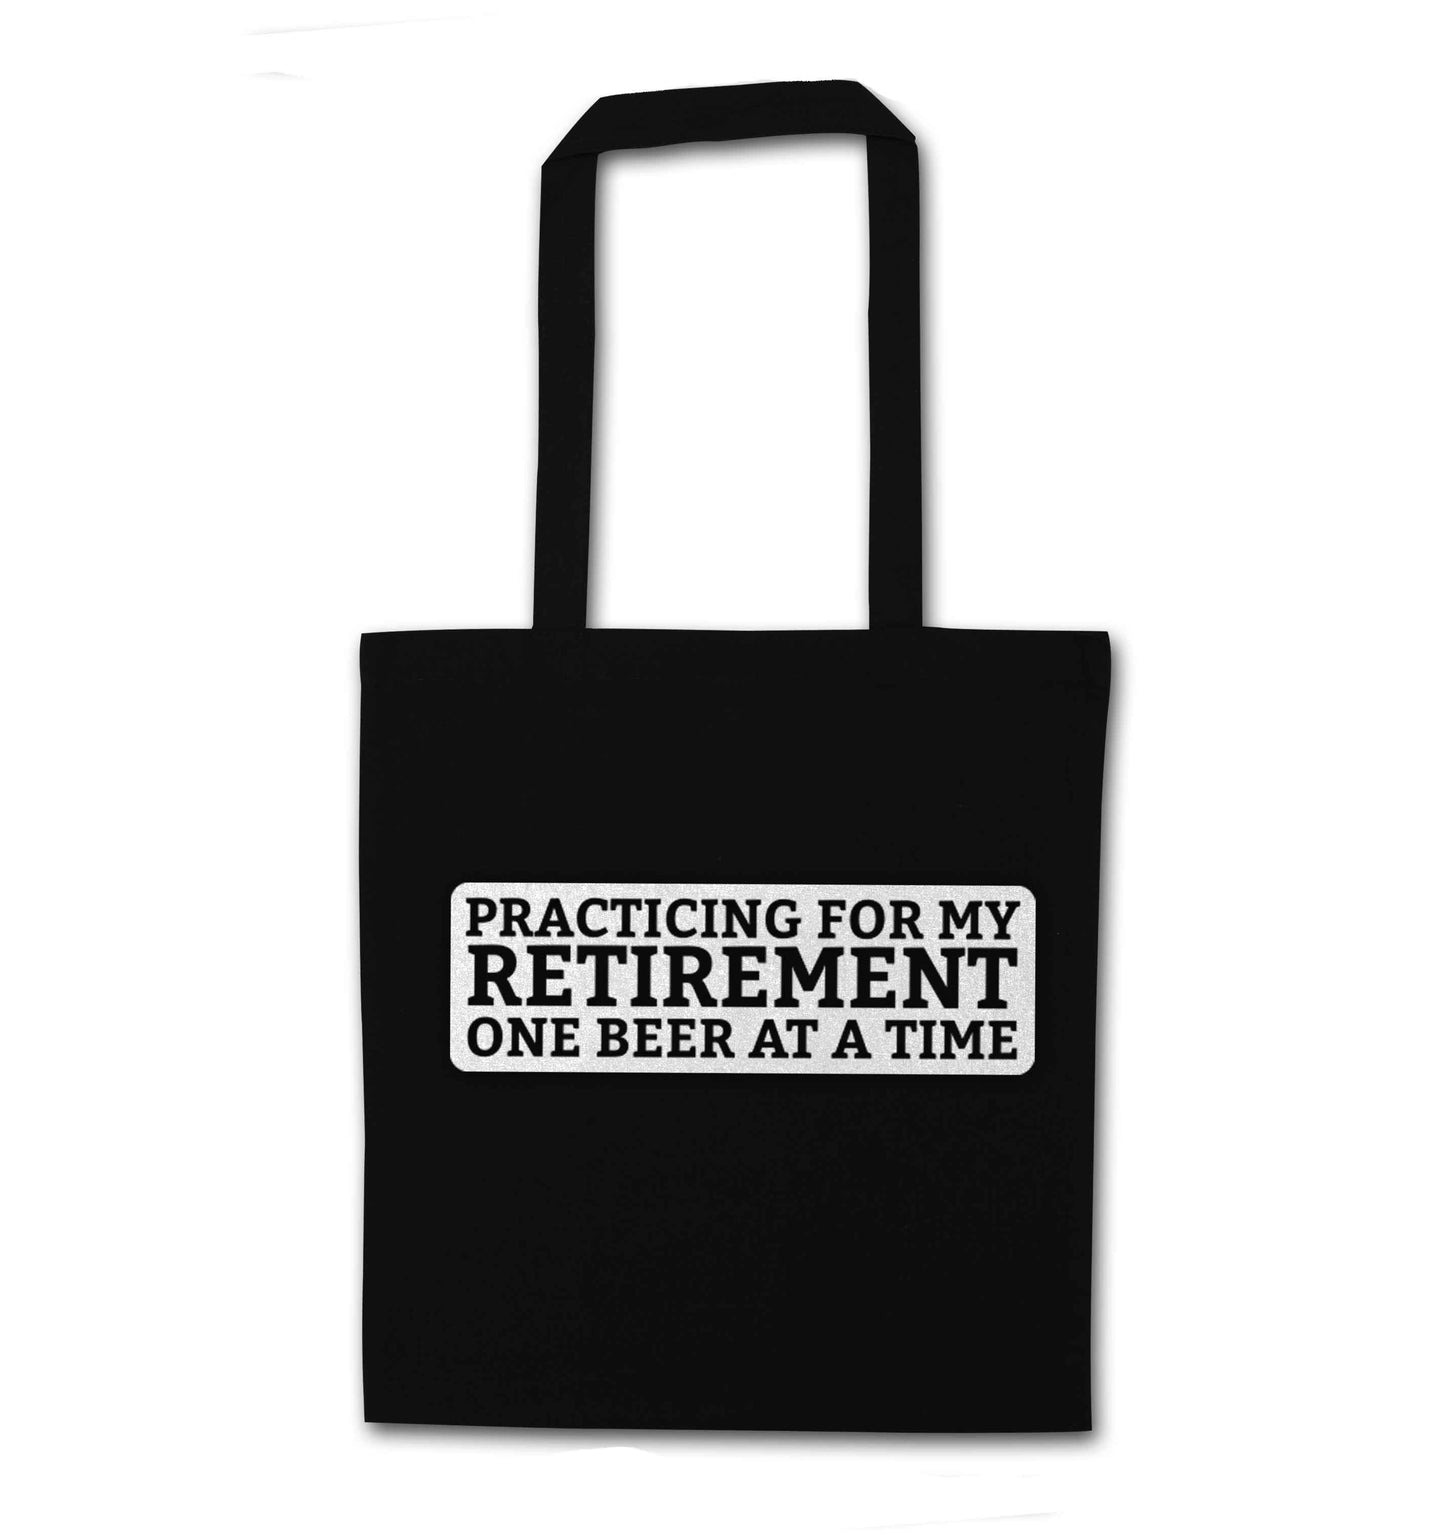 Practicing for my Retirement one Beer at a Time black tote bag